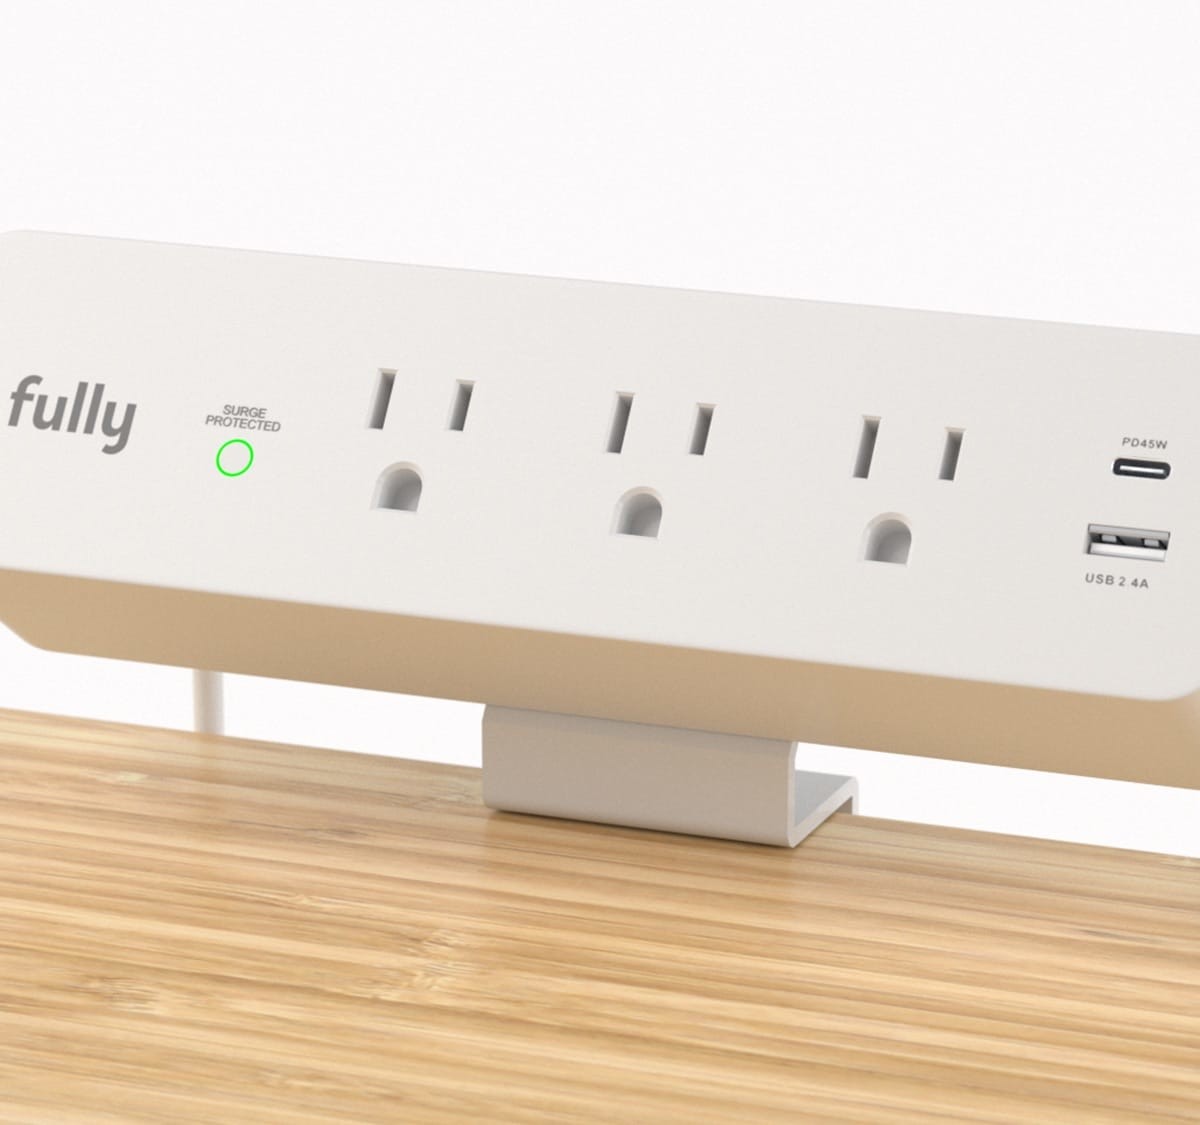 Fully Clamp-Mounted Surge Protector keeps outlets at your fingertips